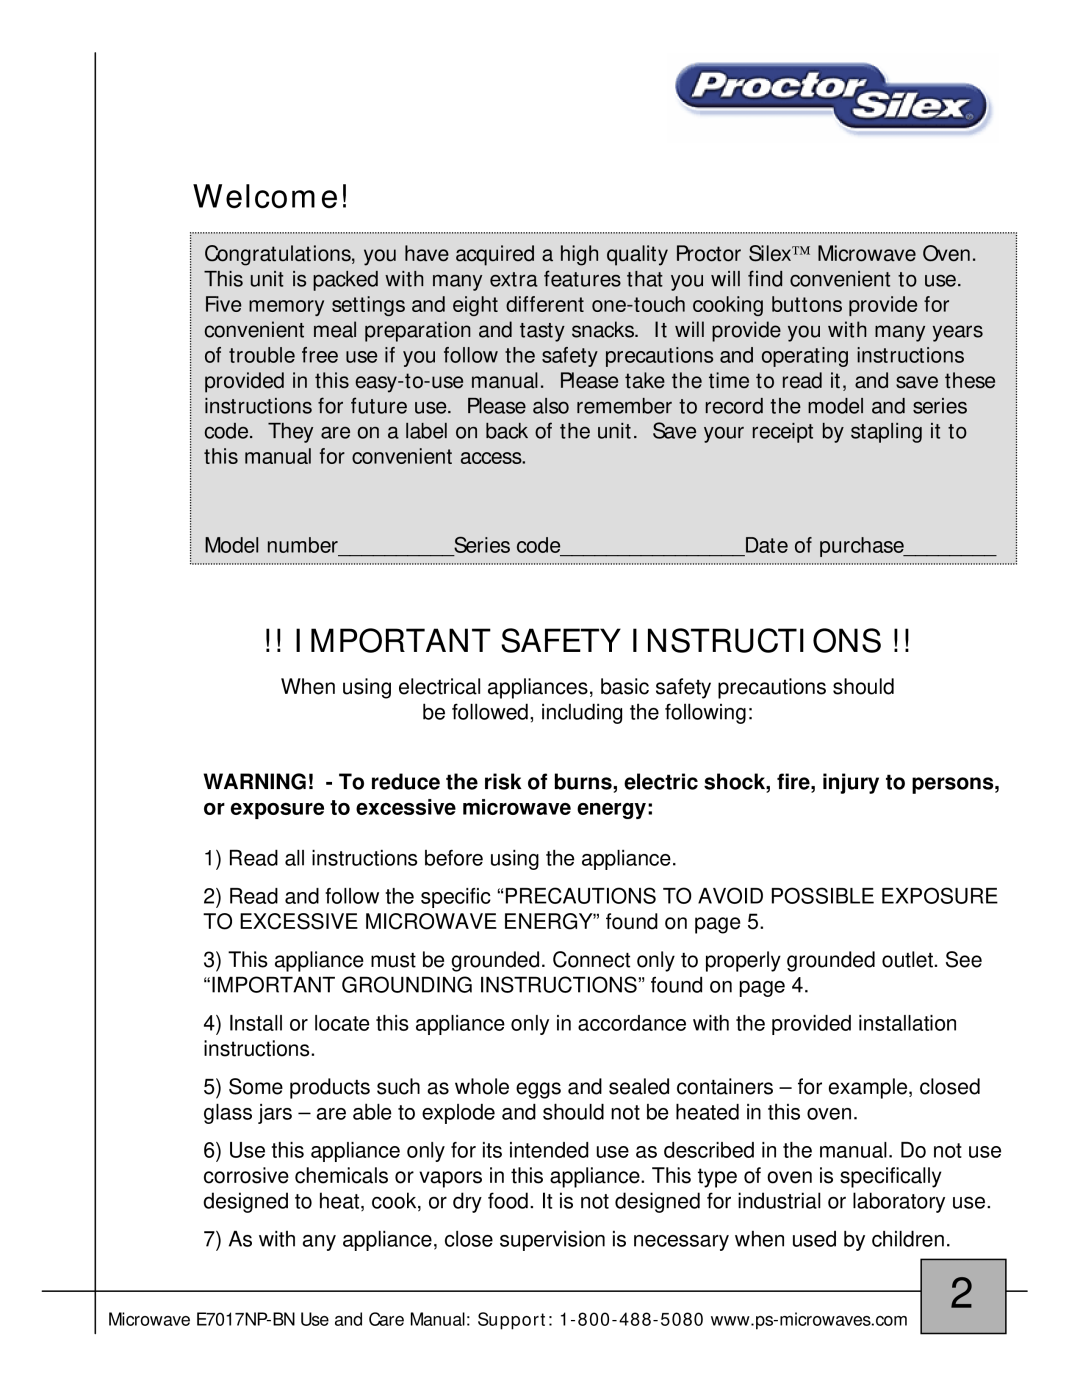 Proctor-Silex E7017NP-BN owner manual Welcome, Important Safety Instructions 